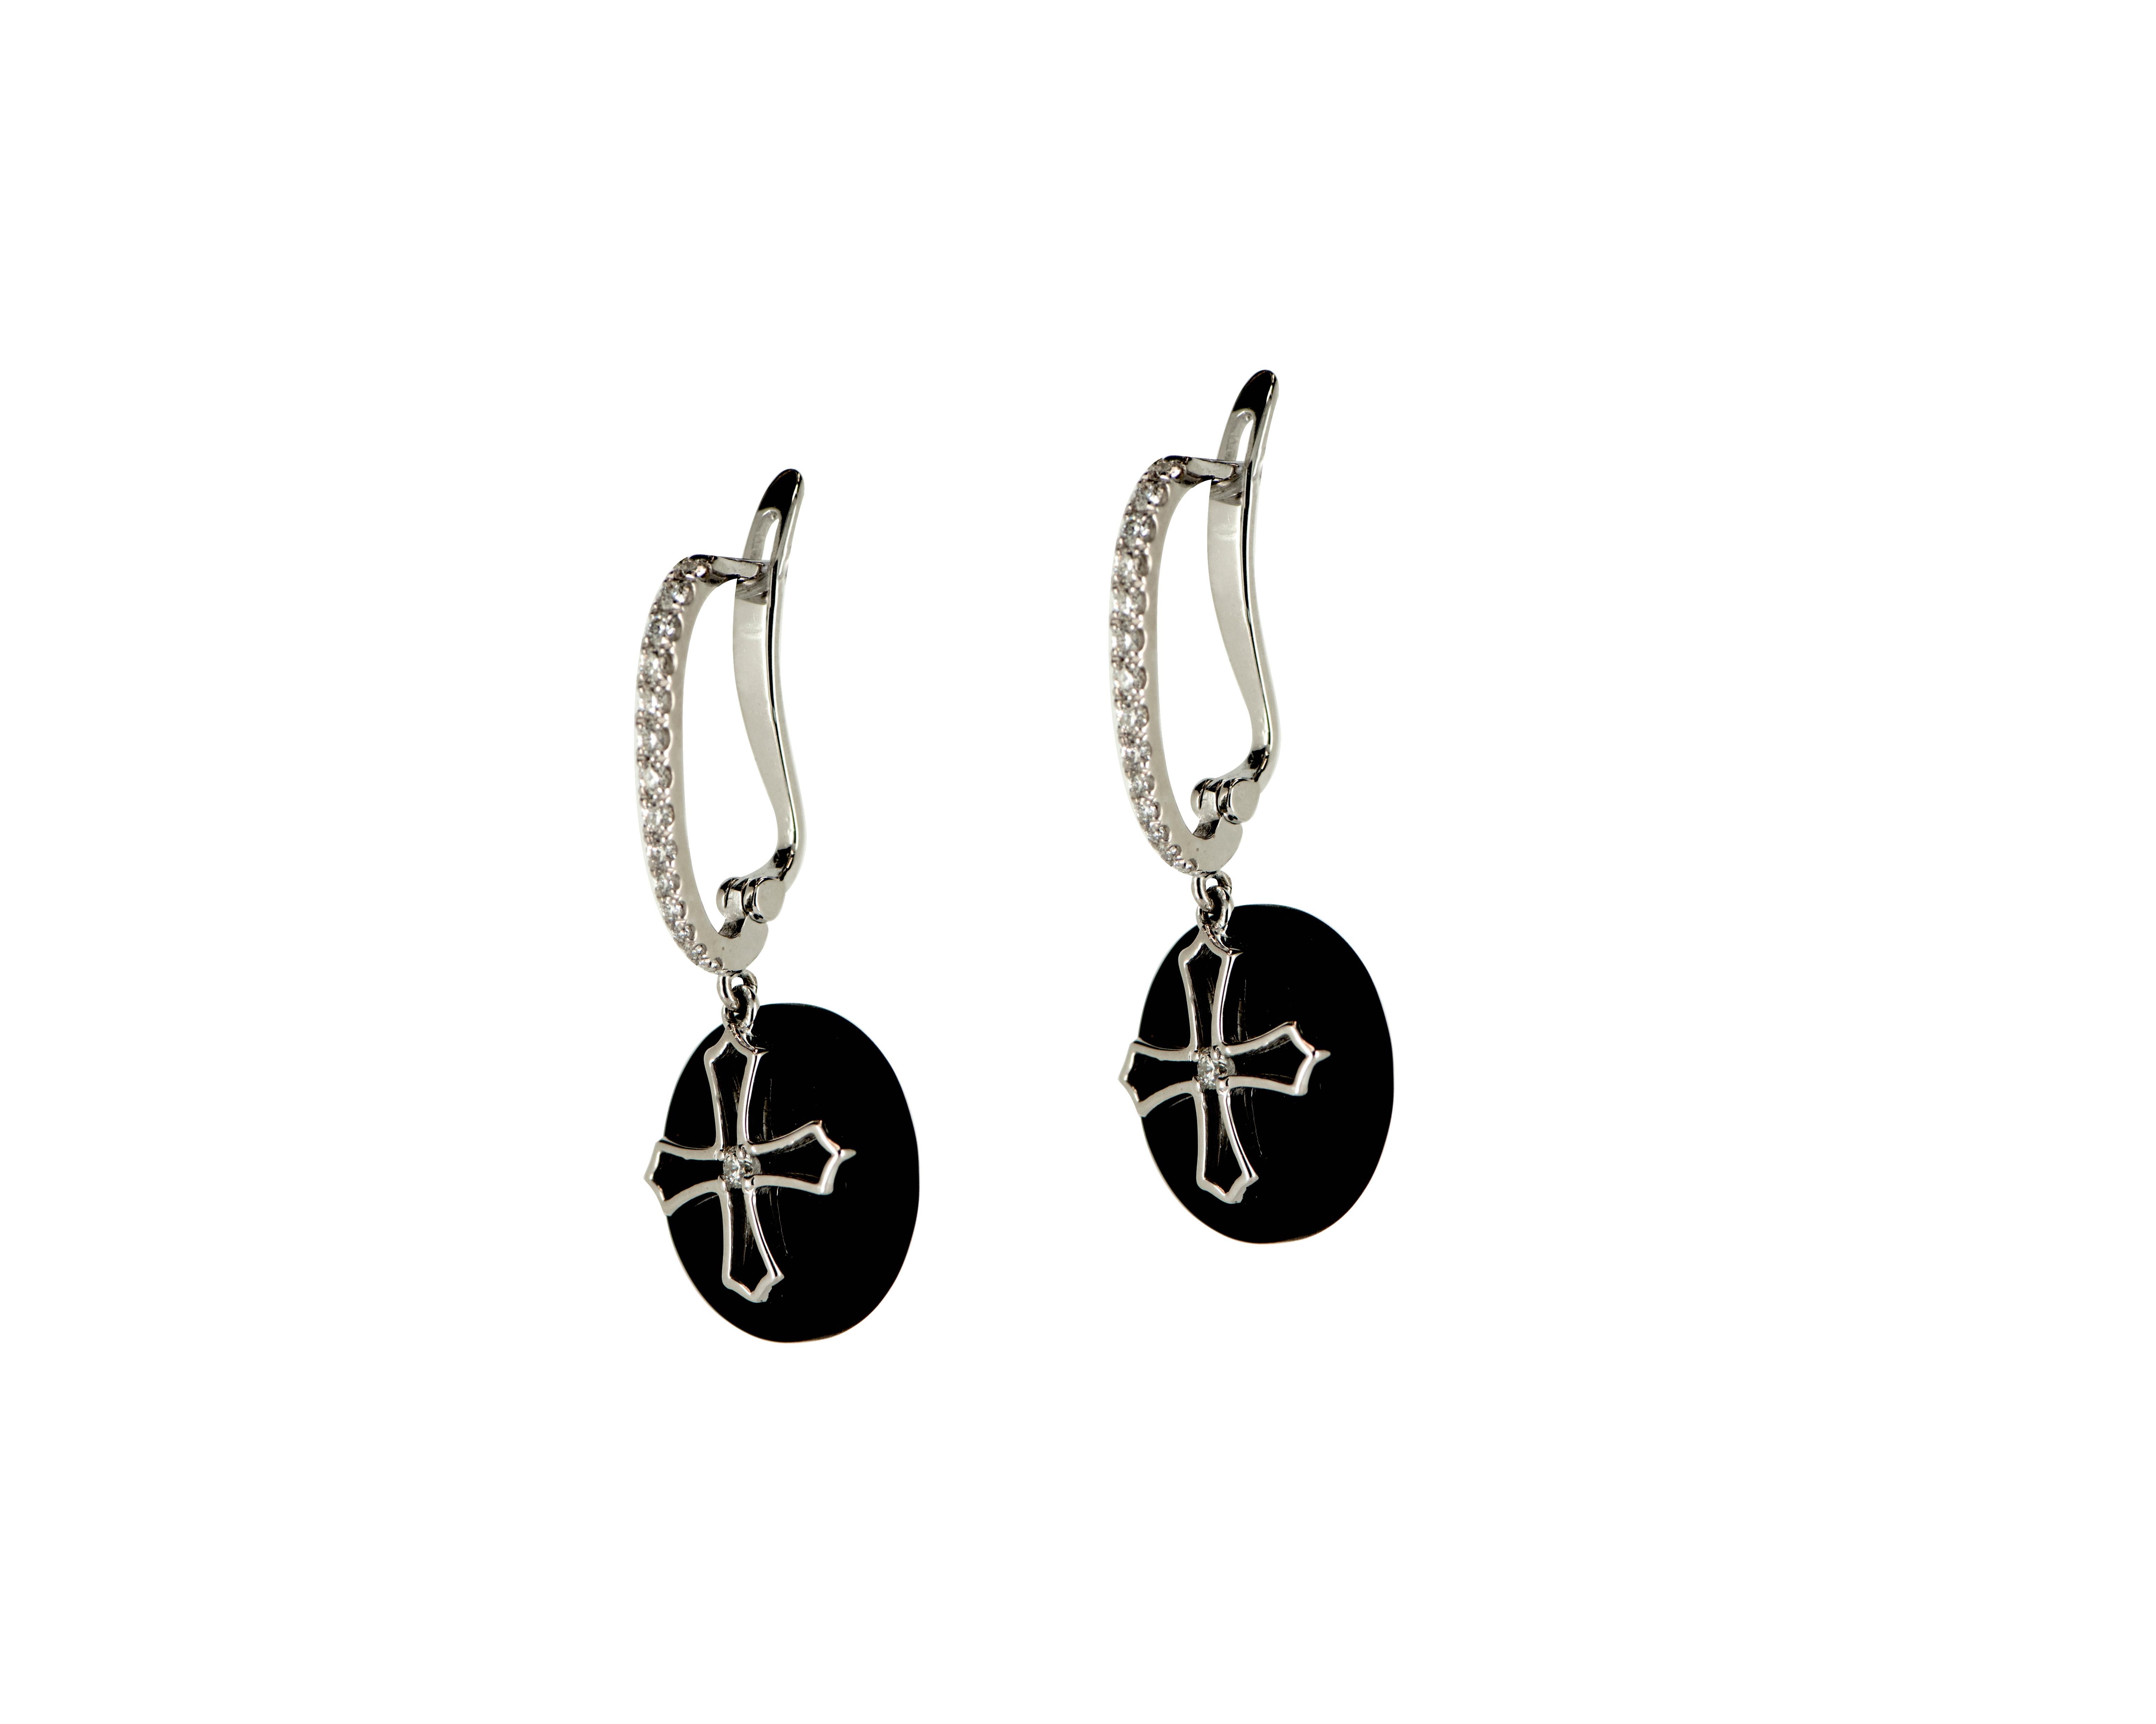 These 18 Karat White Gold Black Onyx Diamond Cross Dangle Earrings are a perfect representation of timeless elegance and sophistication. The sleek, black onyx gemstones make a bold statement and are beautifully accented by the sparkling .20ct of